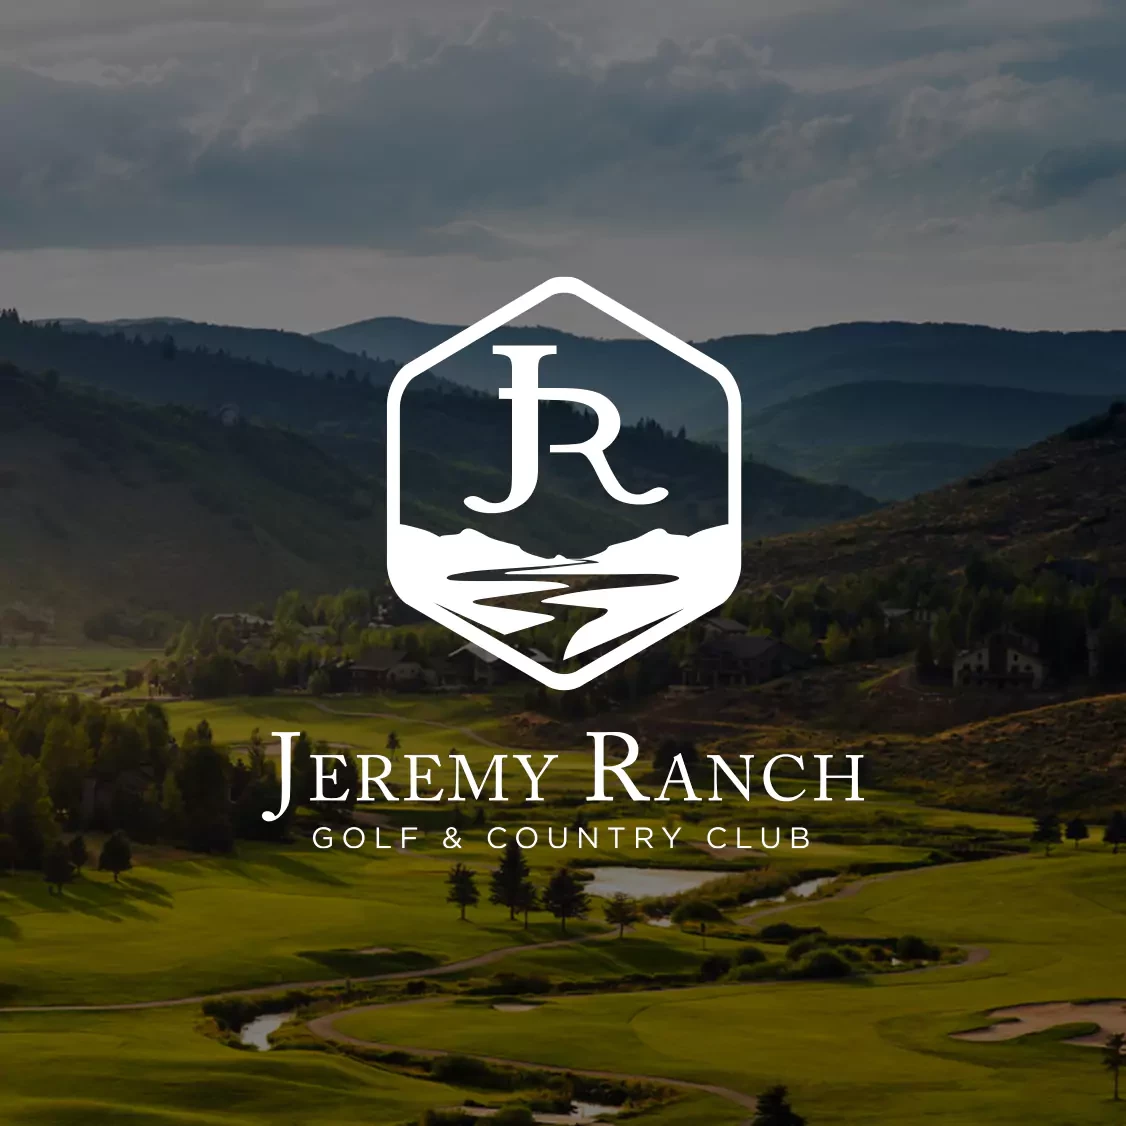 SMMT Retailer | Jeremy Ranch Golf & Country Club